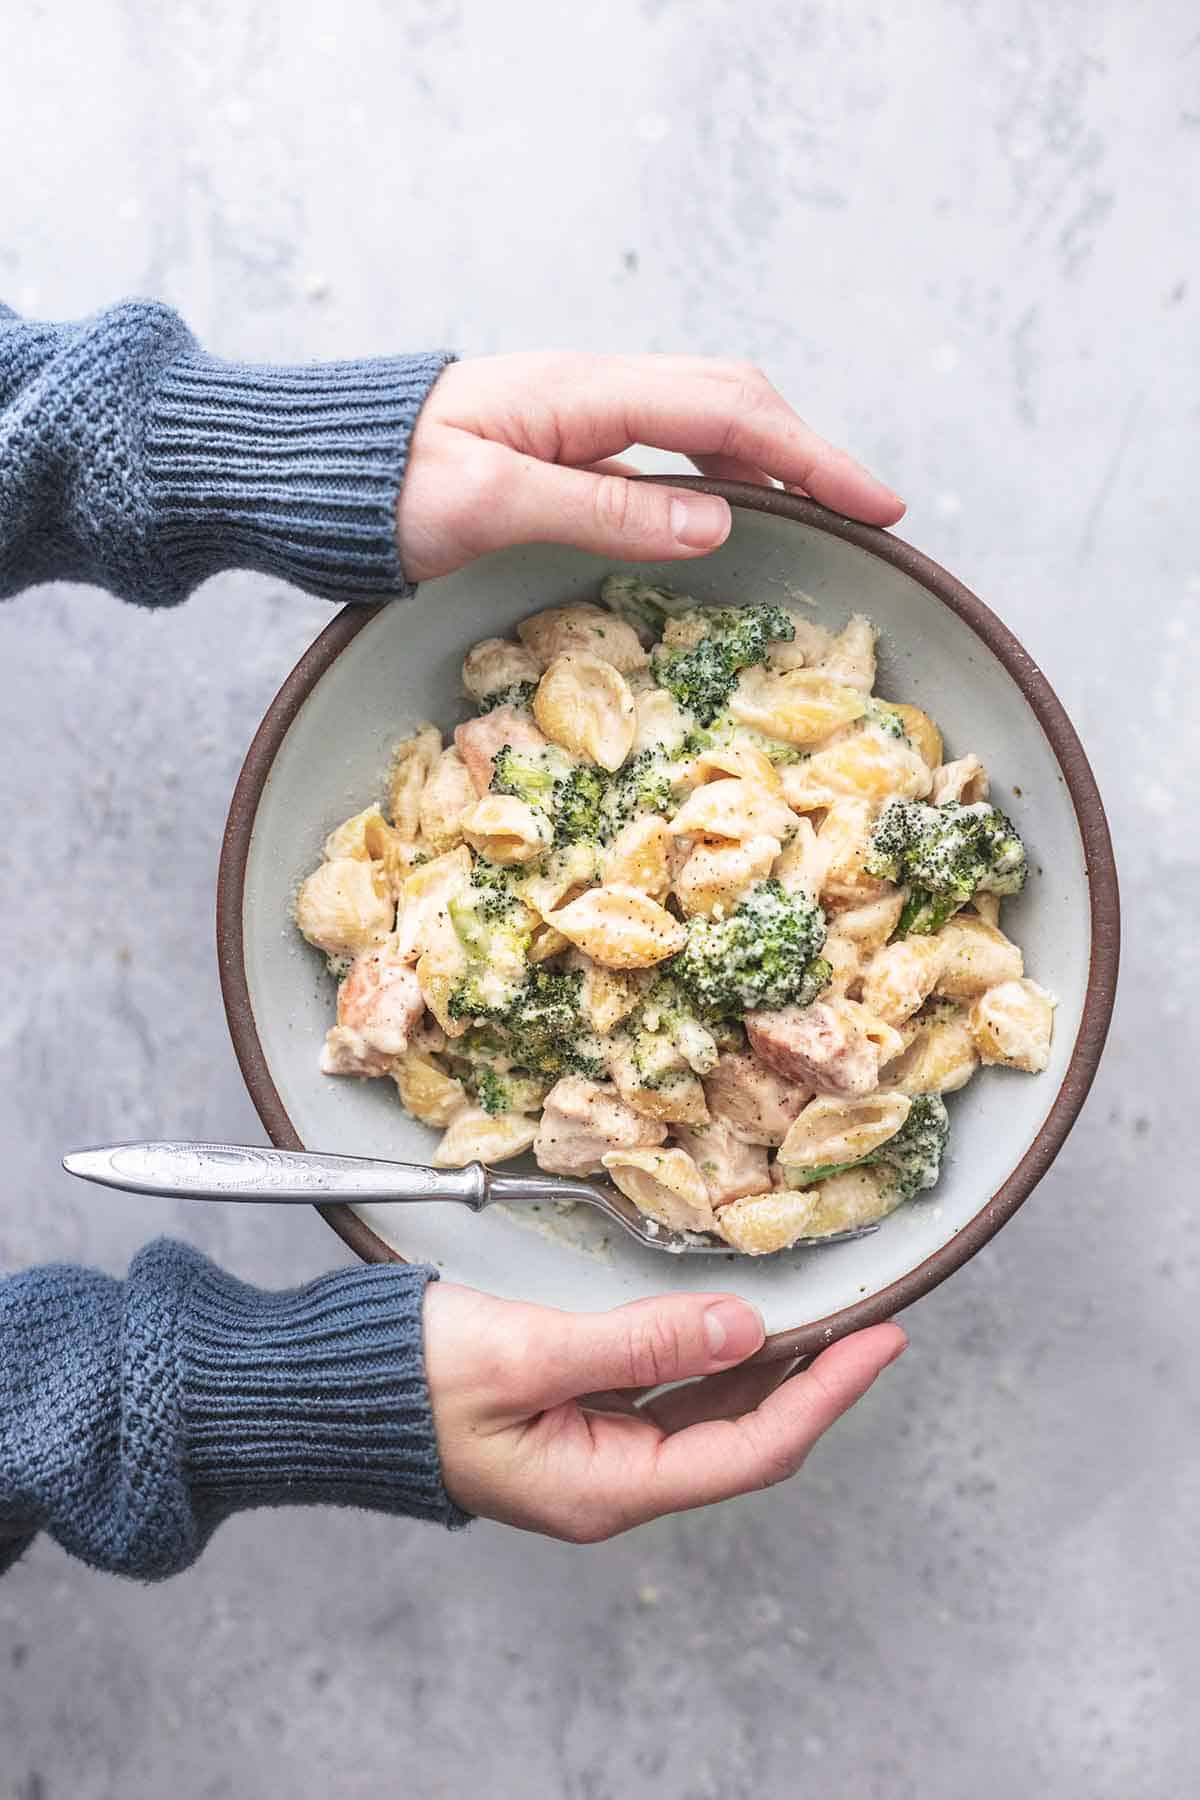 top view of hands holding bowl of chicken alfredo with broccoli.